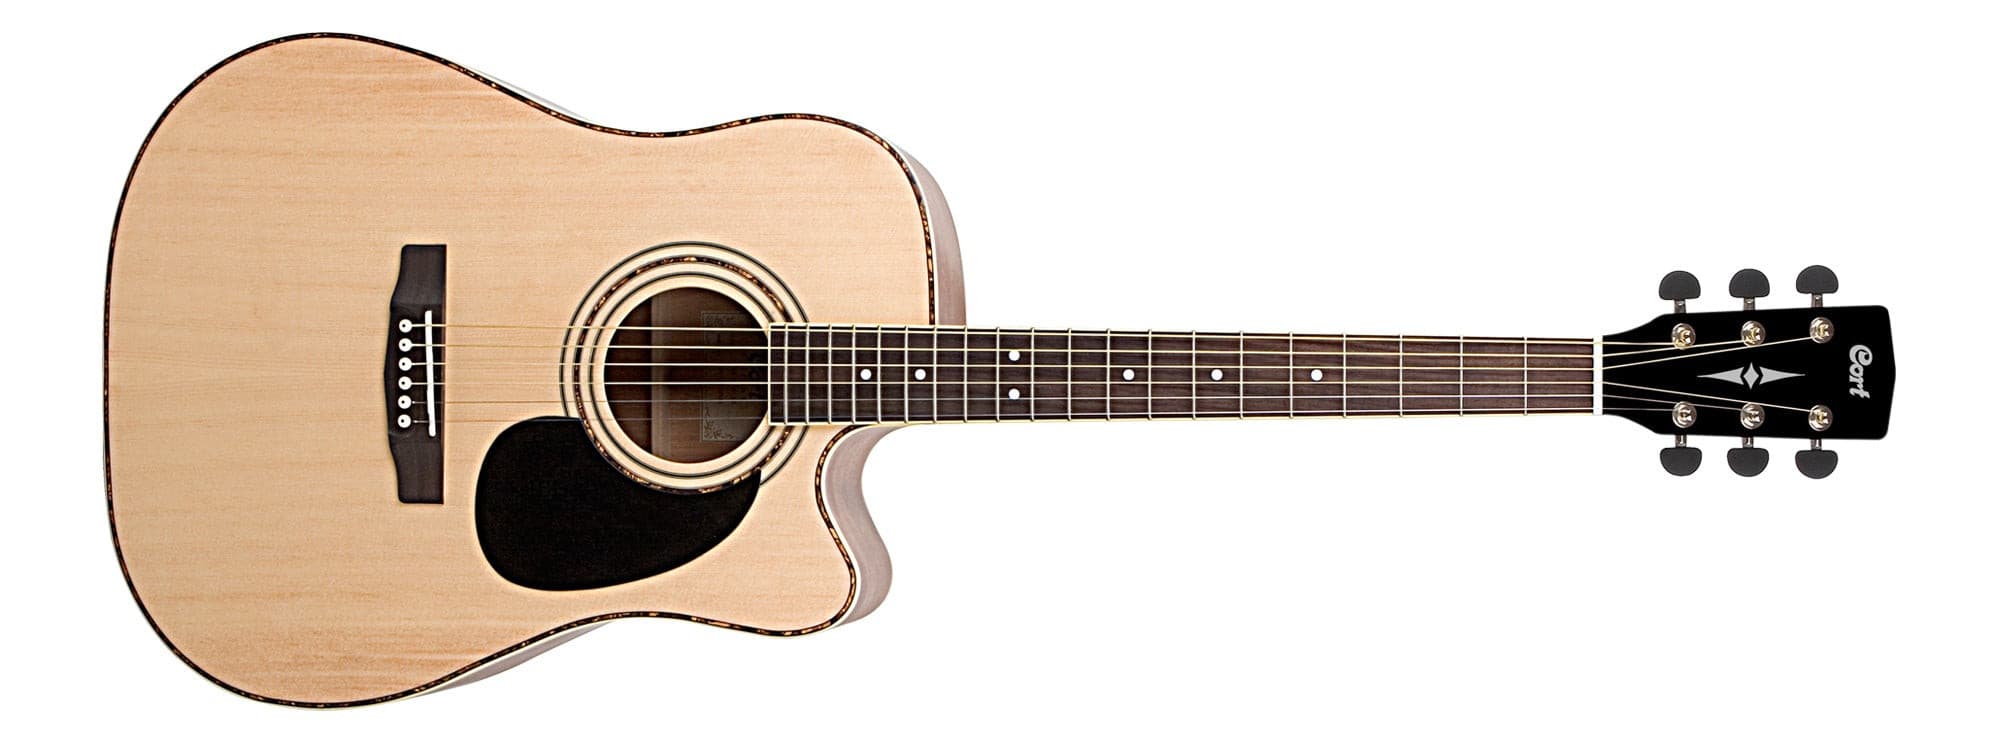 Cort AD880 CE Natural Satin, Electro Acoustic Guitar for sale at Richards Guitars.